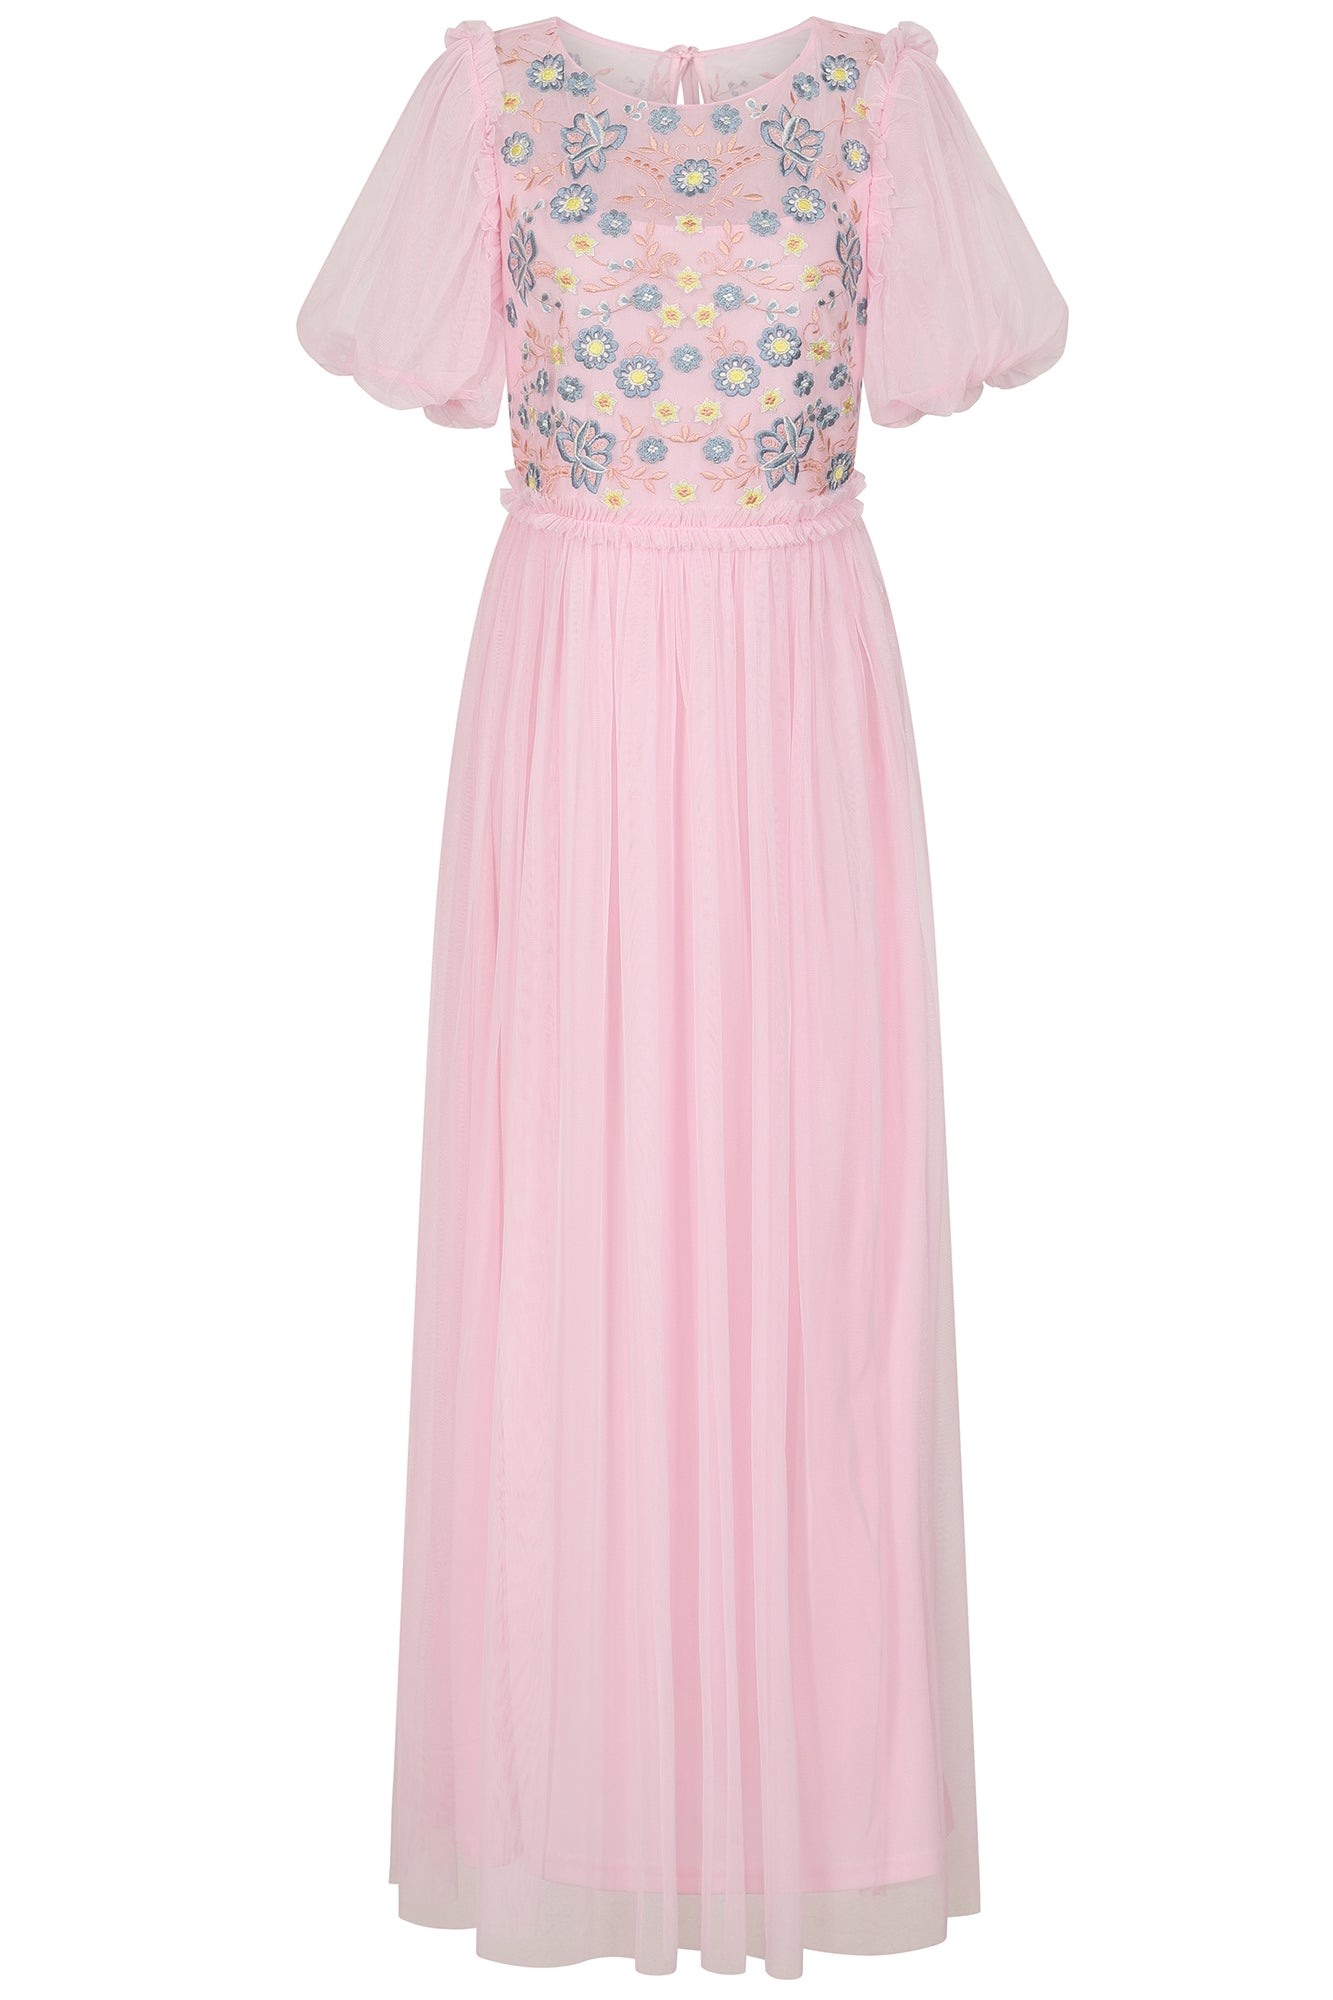 Women’s Pink / Purple Laraline Puff Sleeve Maxi Dress With Floral Embroidery - Blush Medium Frock and Frill